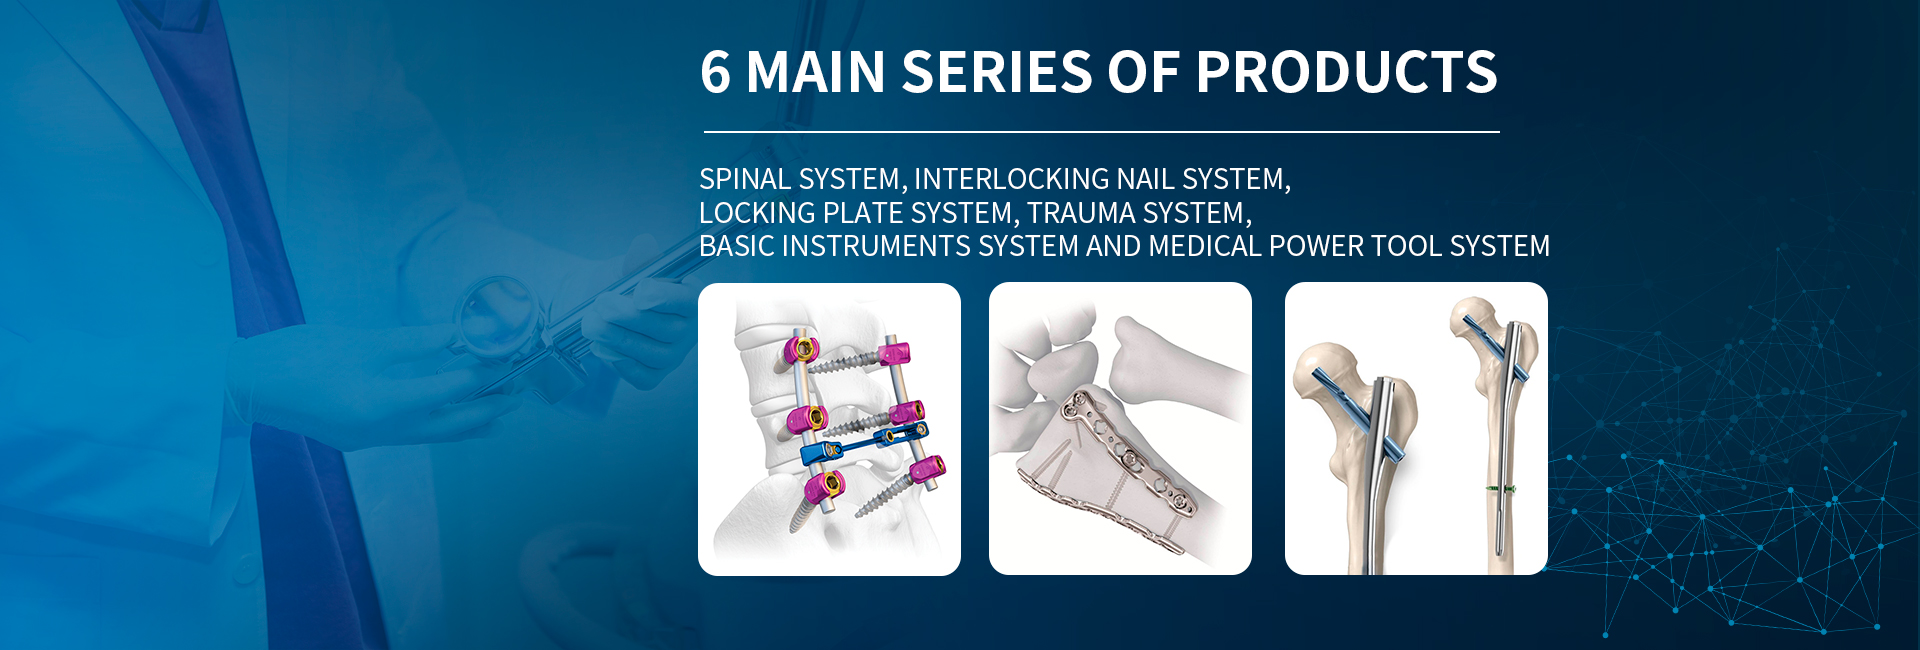 6 MAIN SERIES OF PRODUCTS